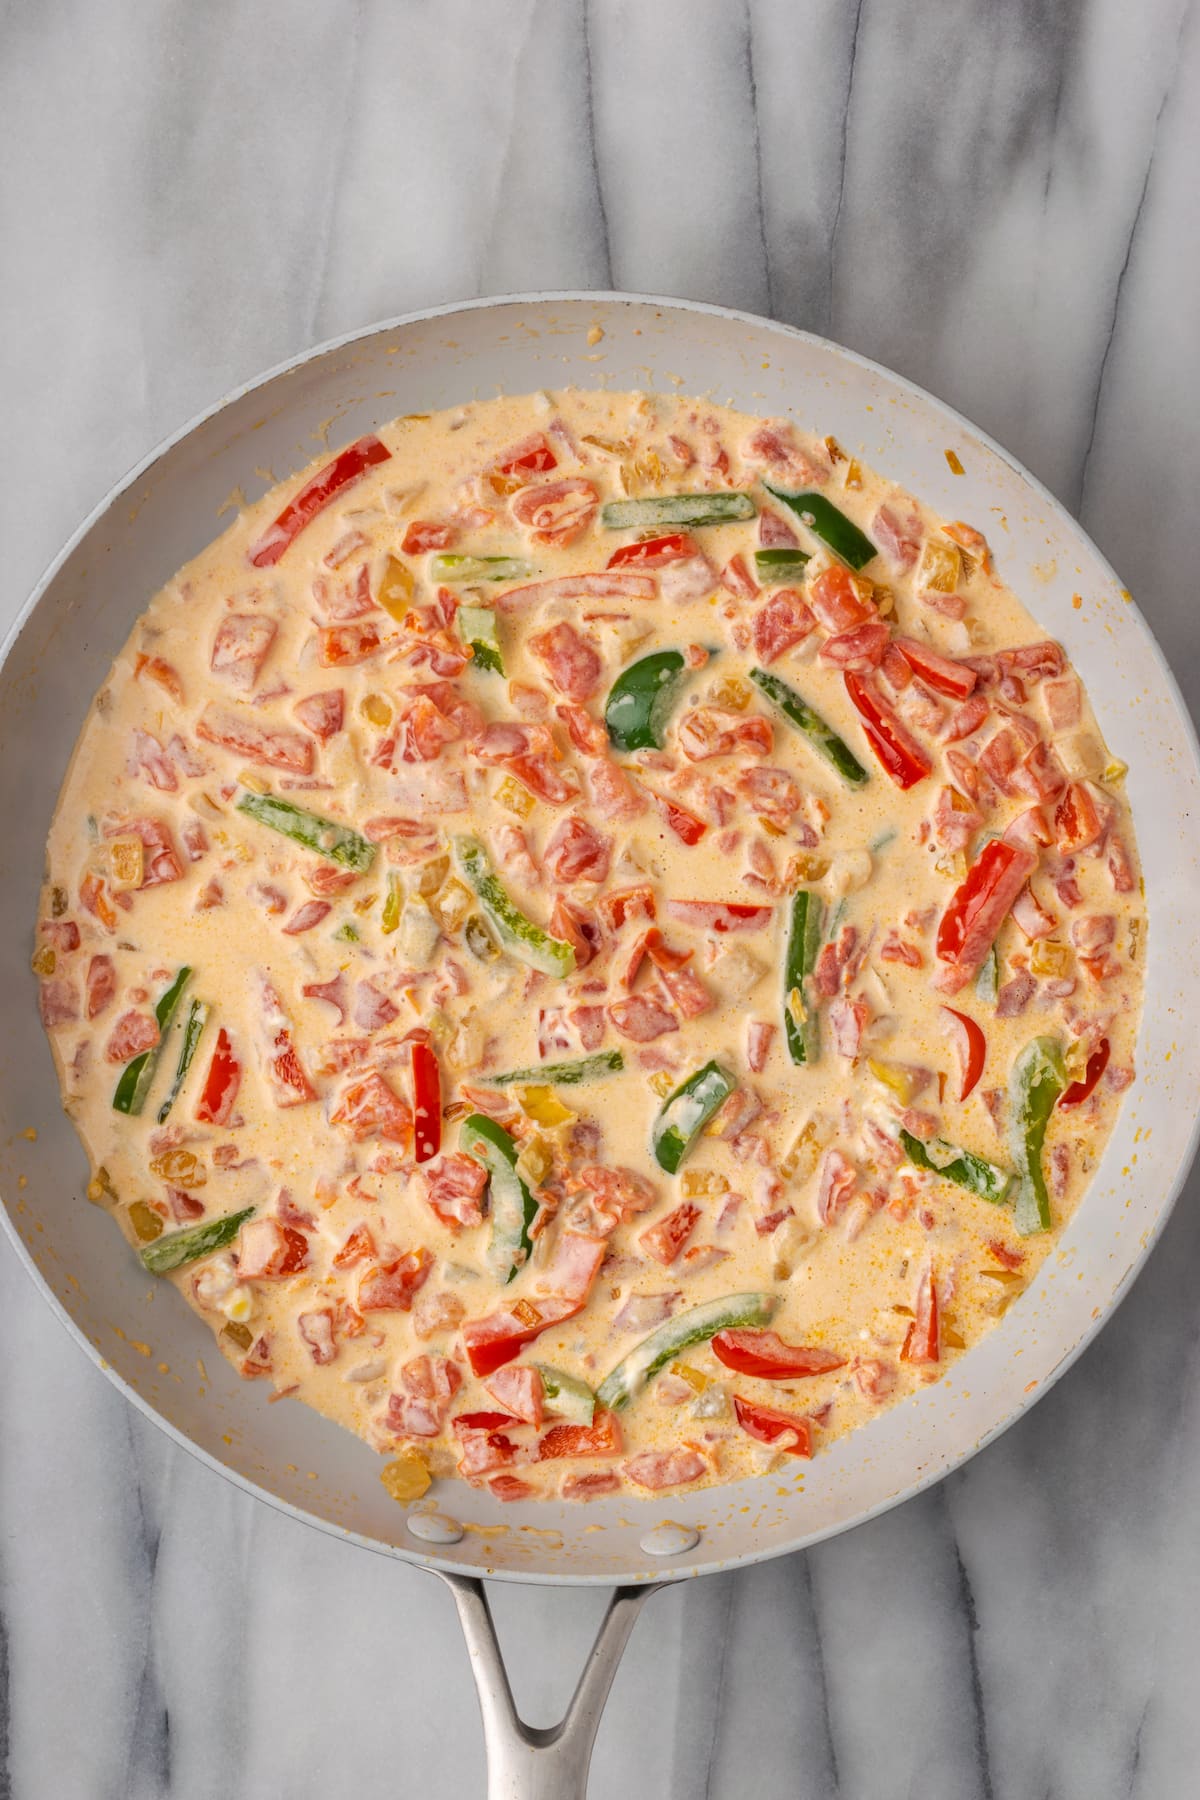 Overhead view of a cream sauce with red and green bell peppers in a skillet